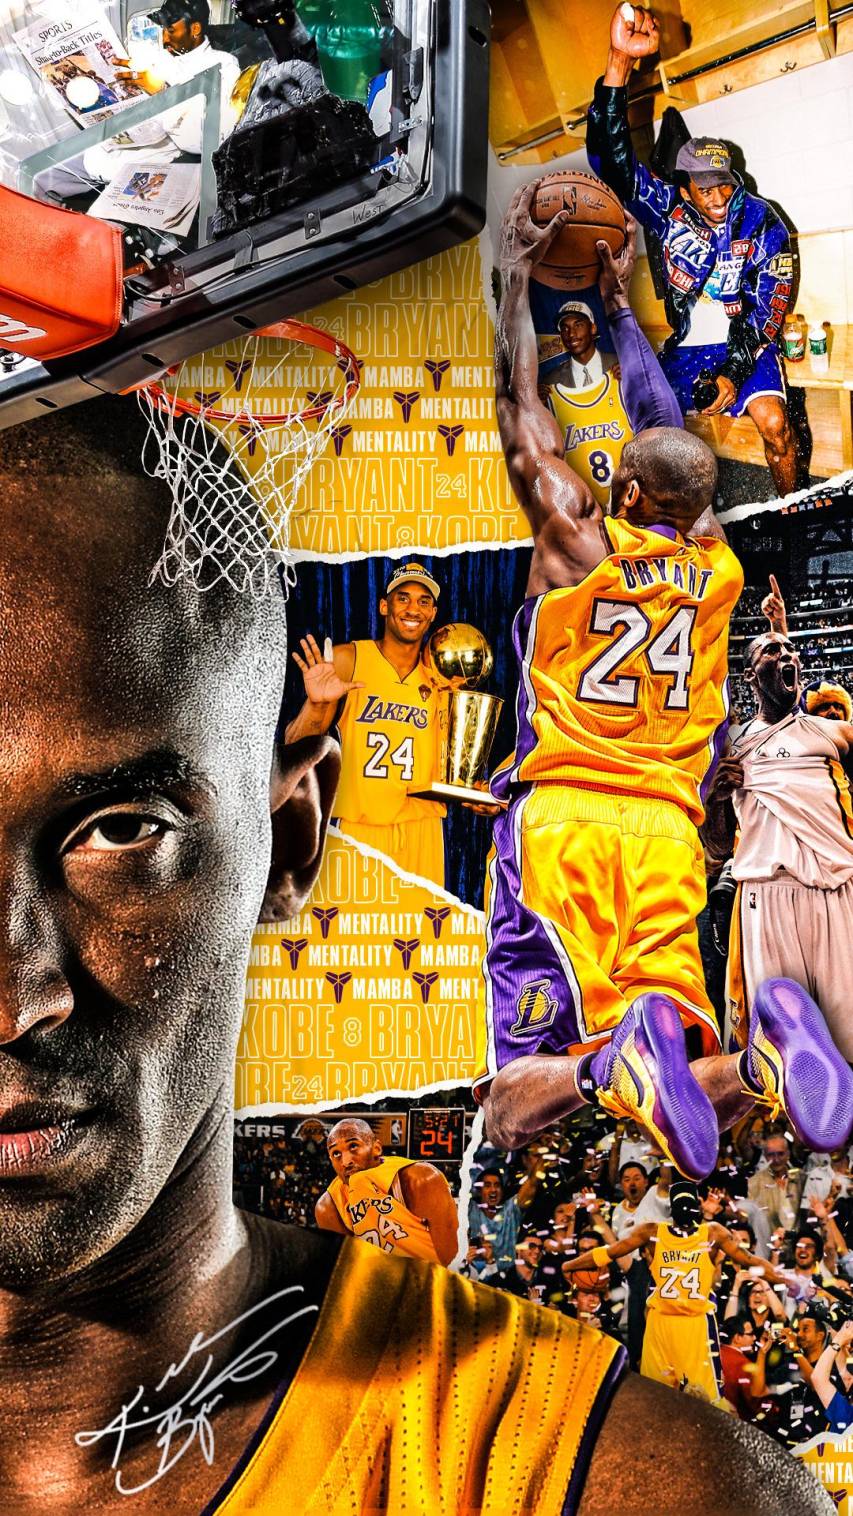 Kobe Bryant collage with some of his best moments. - Kobe Bryant